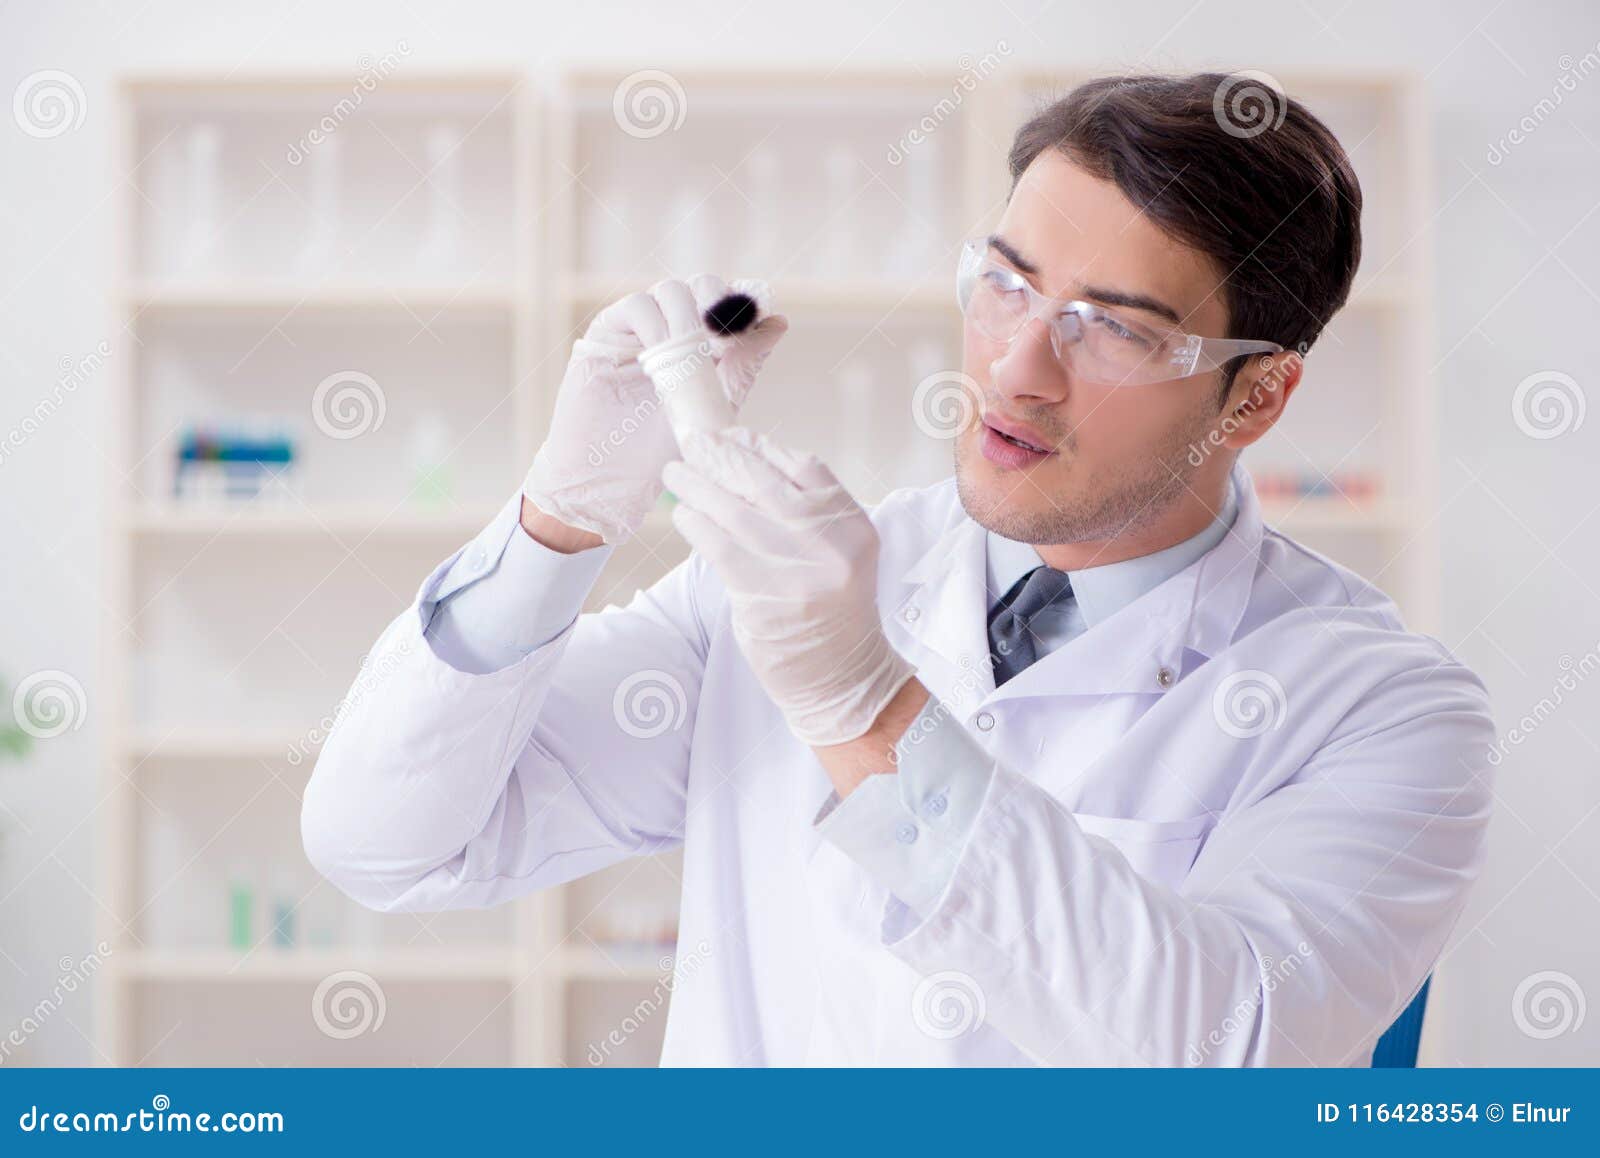 the expert criminologist working in the lab for evidence